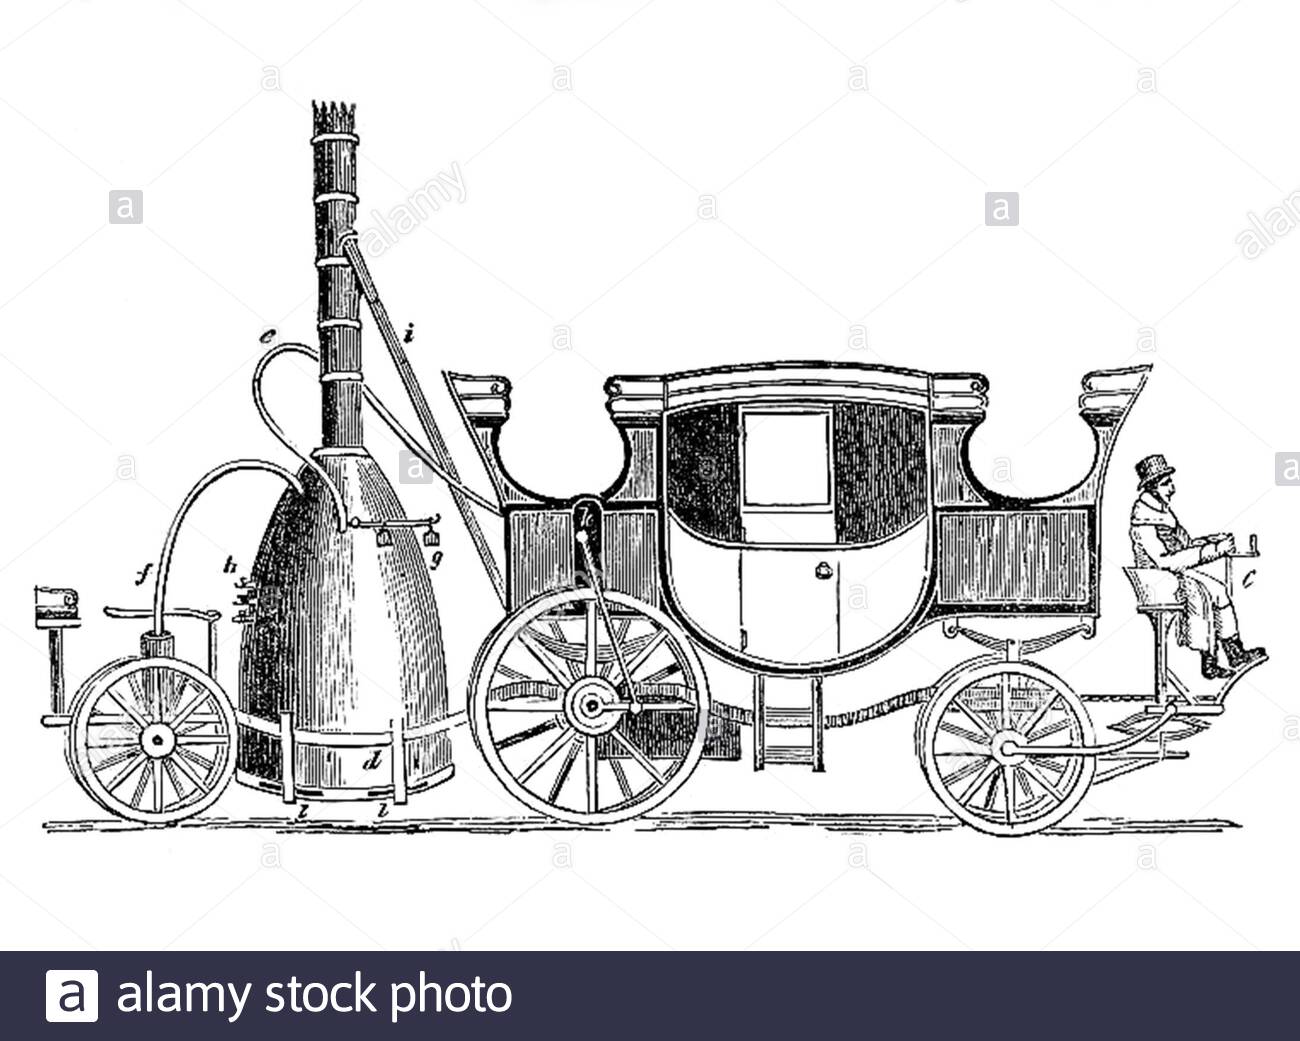 Steam Carriage, vintage illustration from 1830 Stock Photo